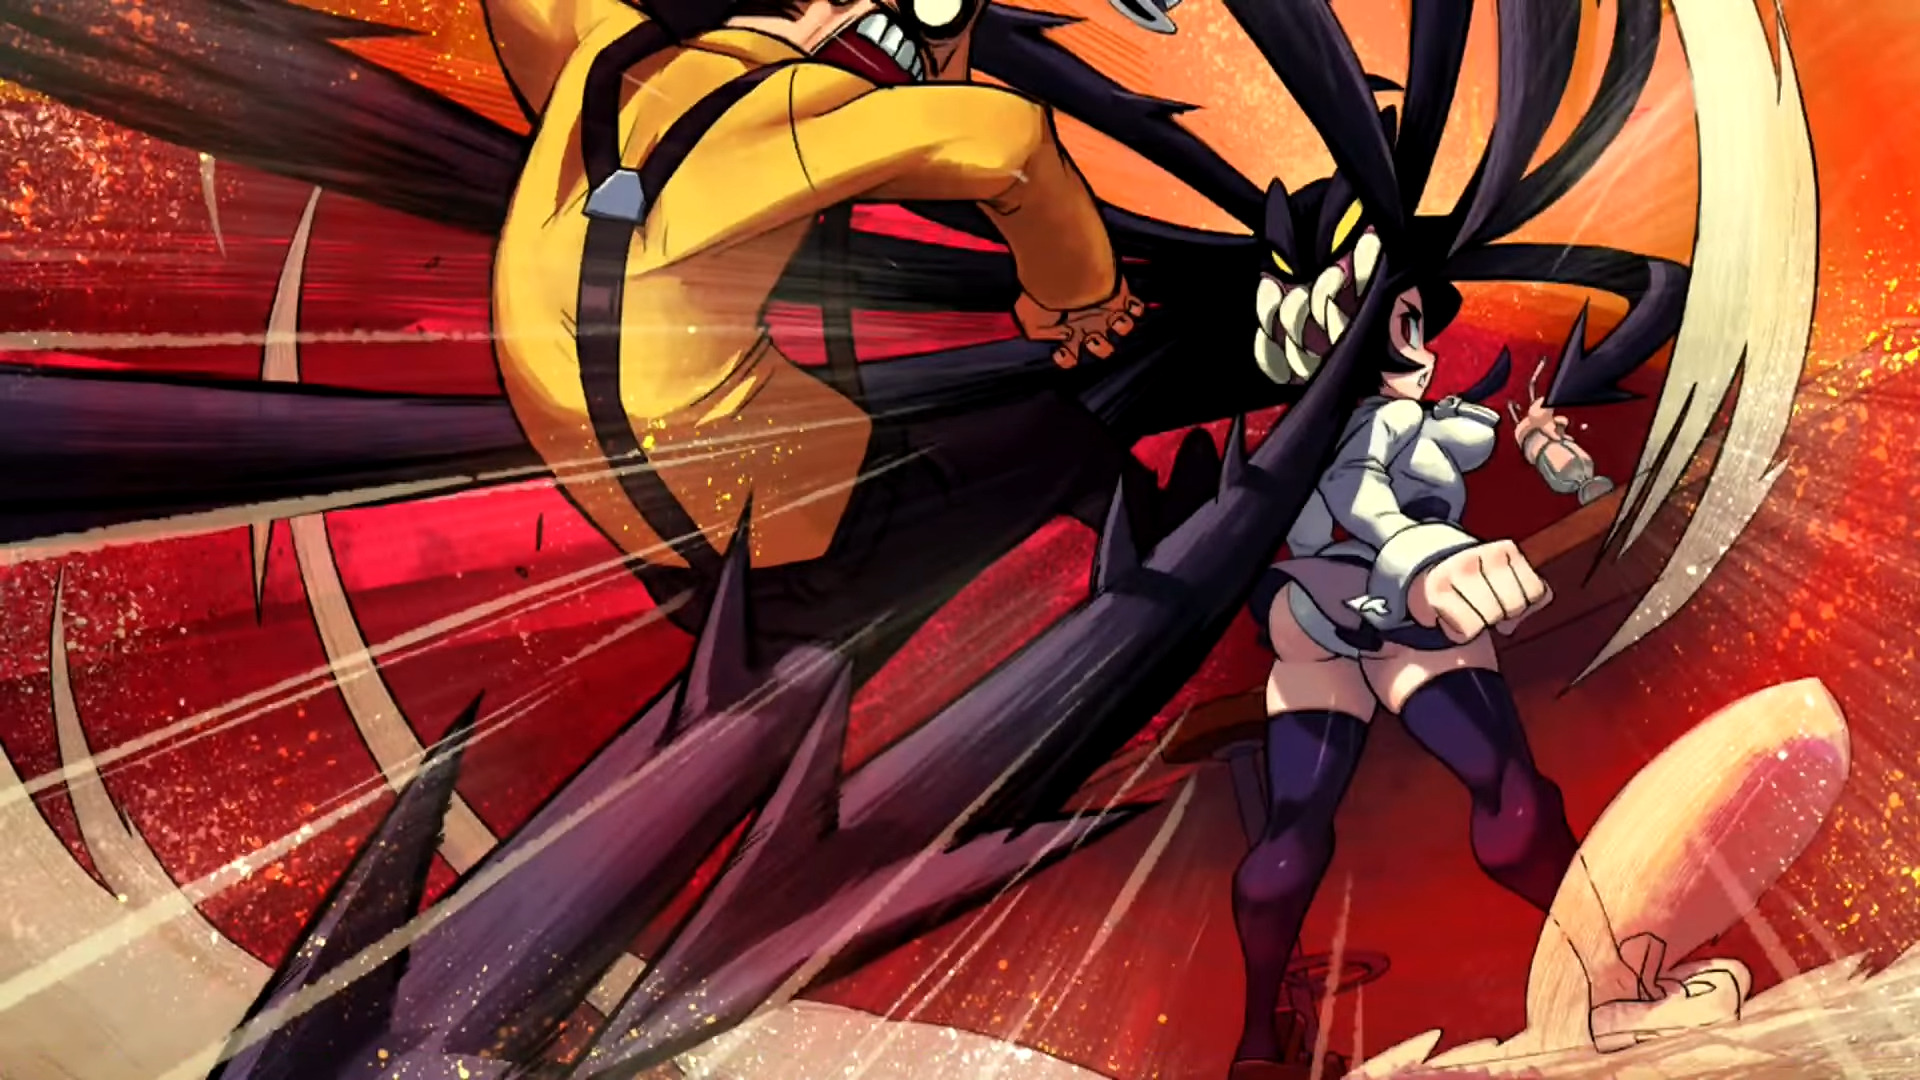 Filia deals with a man who won't take no for an answer in Skullgirls: 2nd Encore (2013), Autumn Games